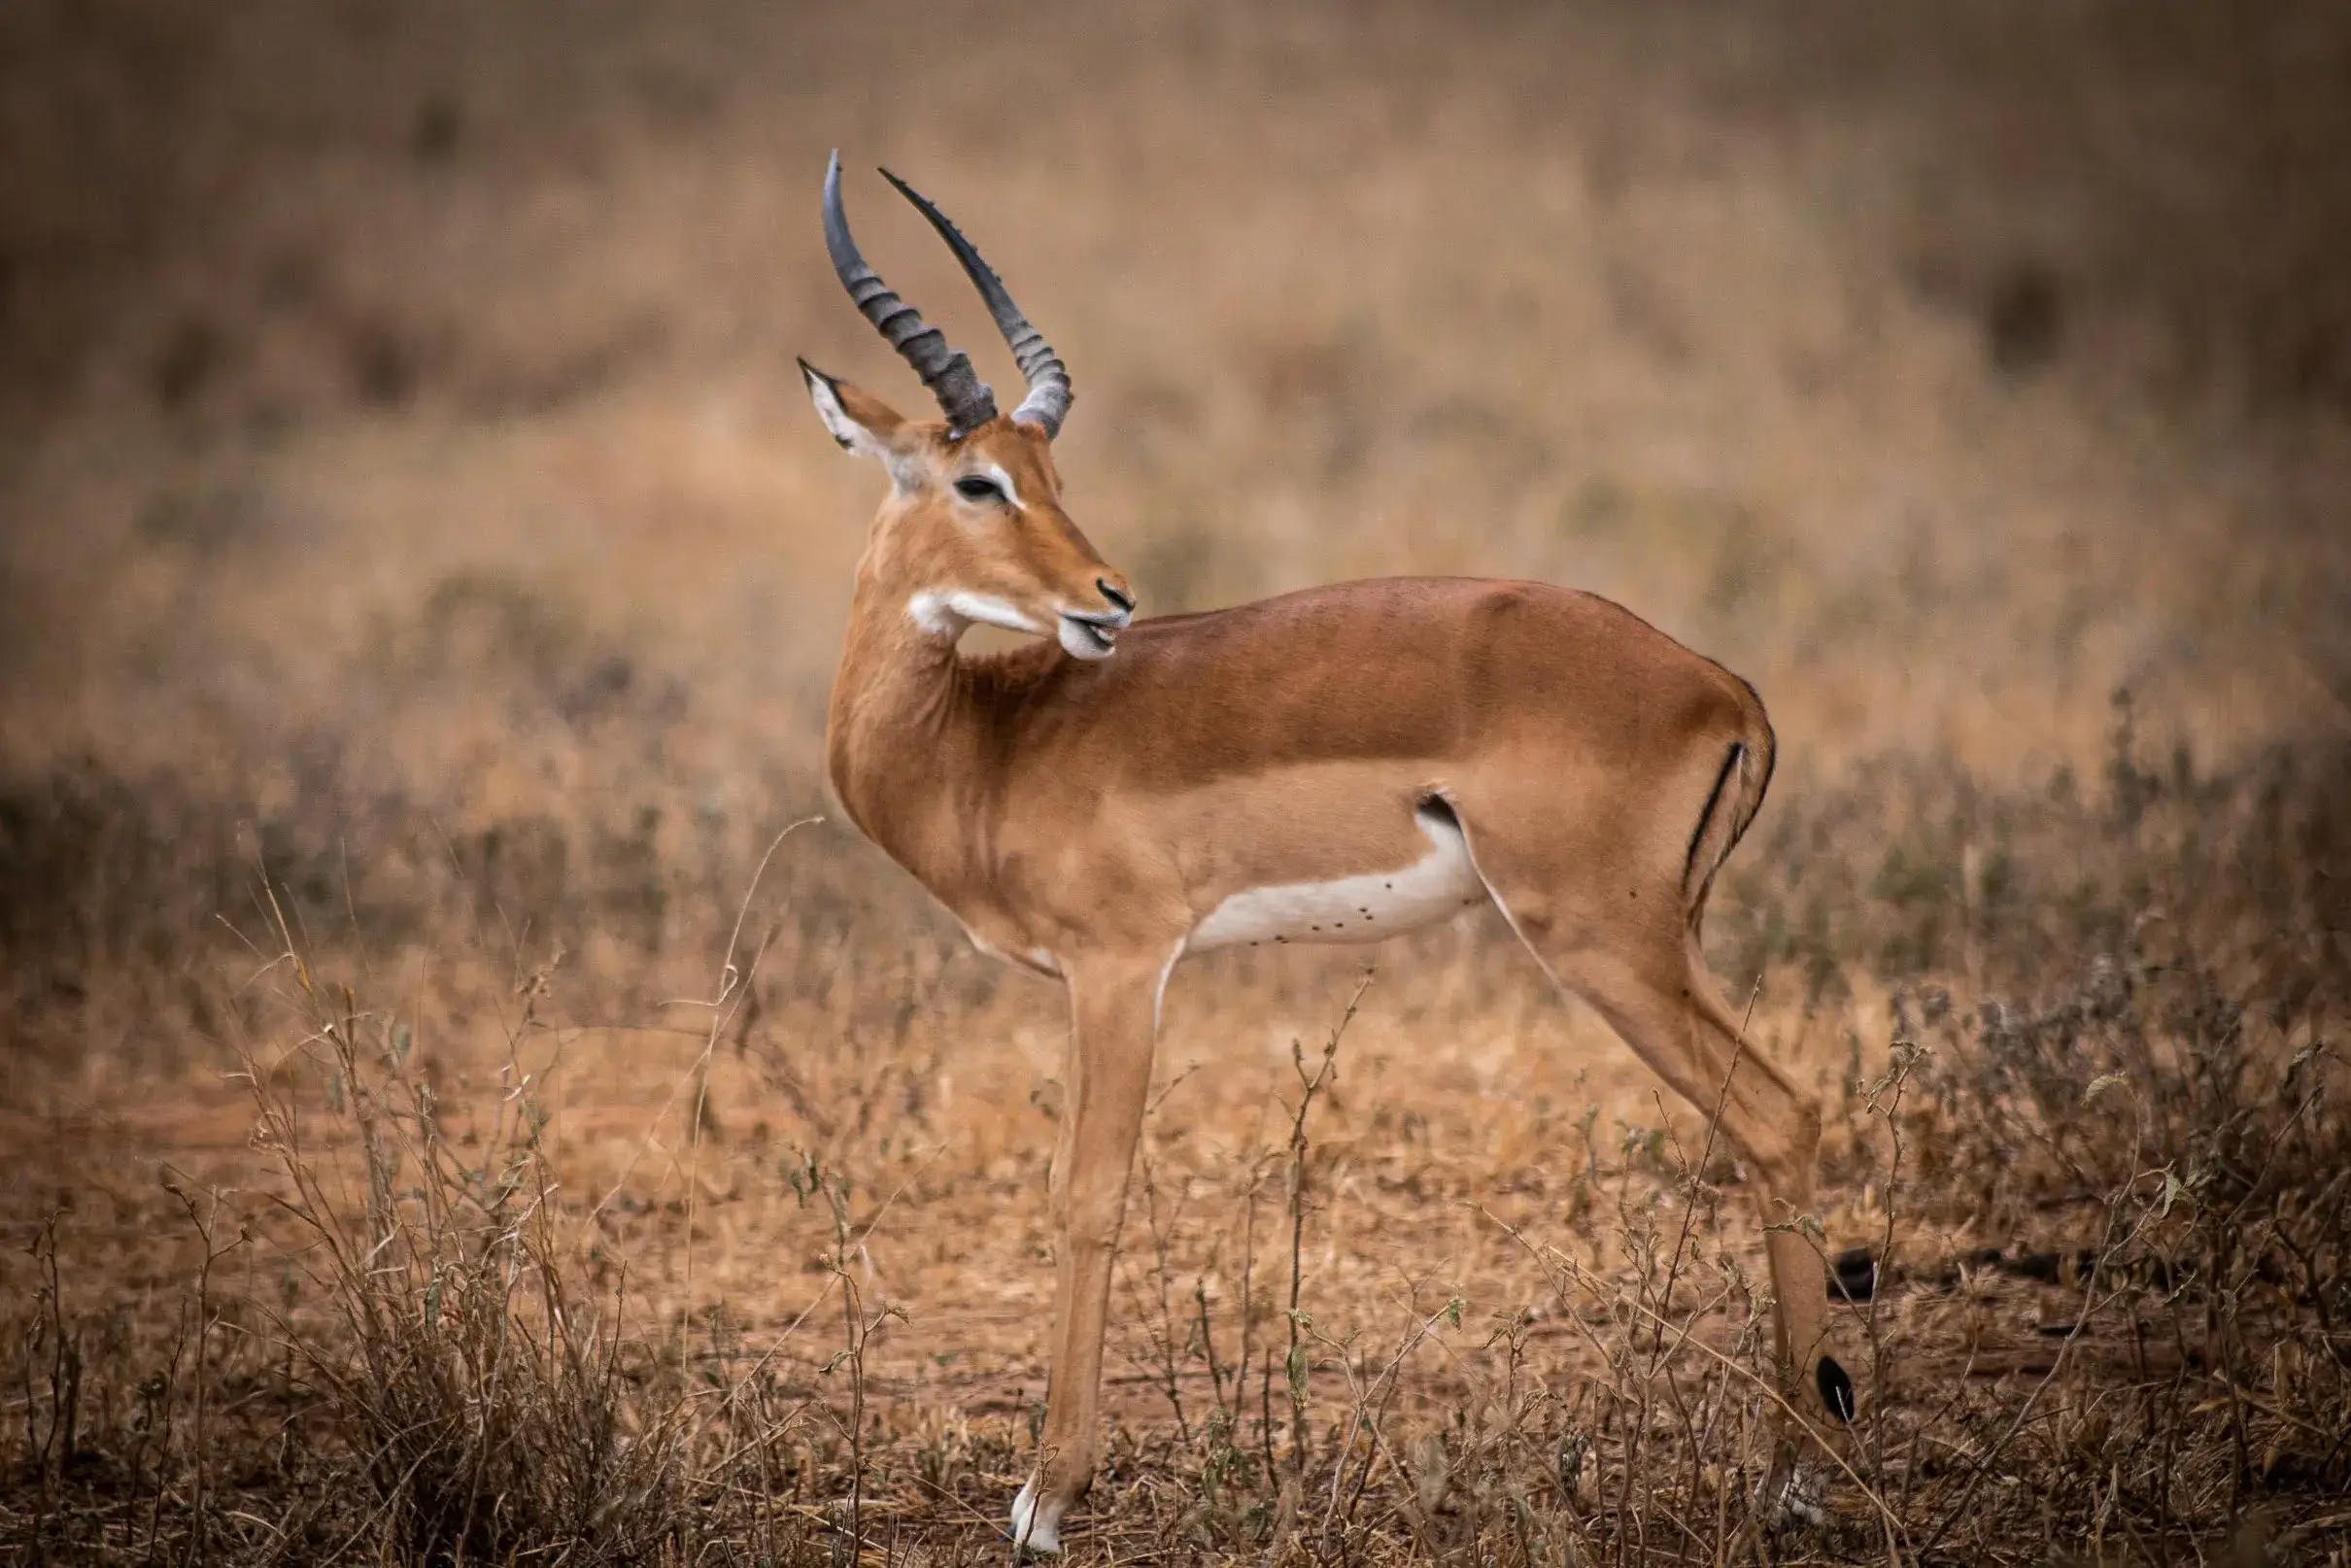 Impala spotted in Tanzanian national park